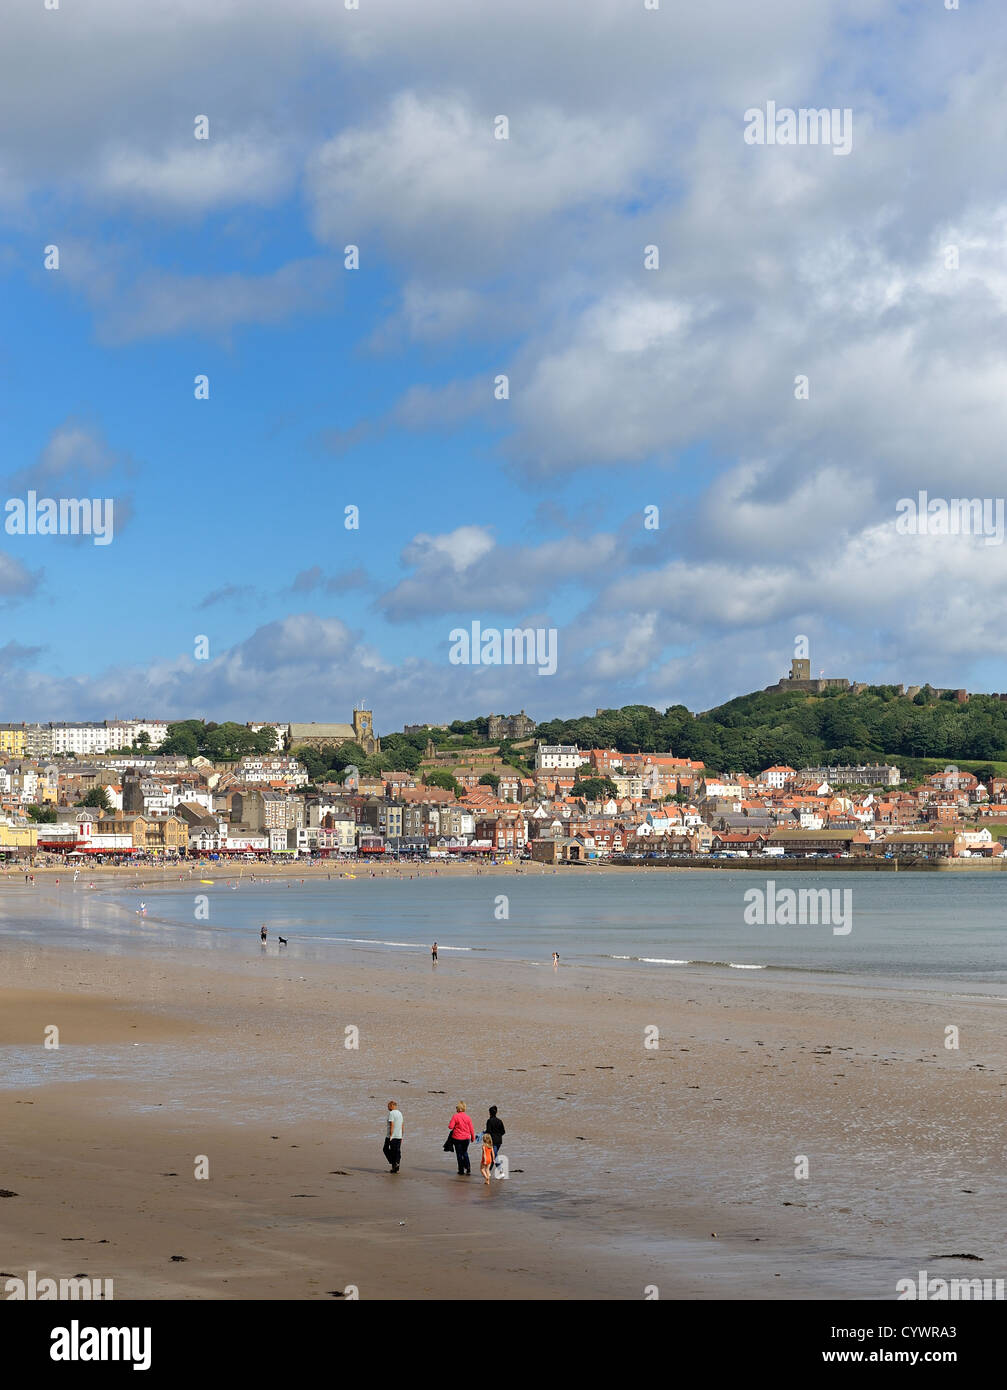 A family walking across scarborough beach north yorkshire england uk Stock Photo